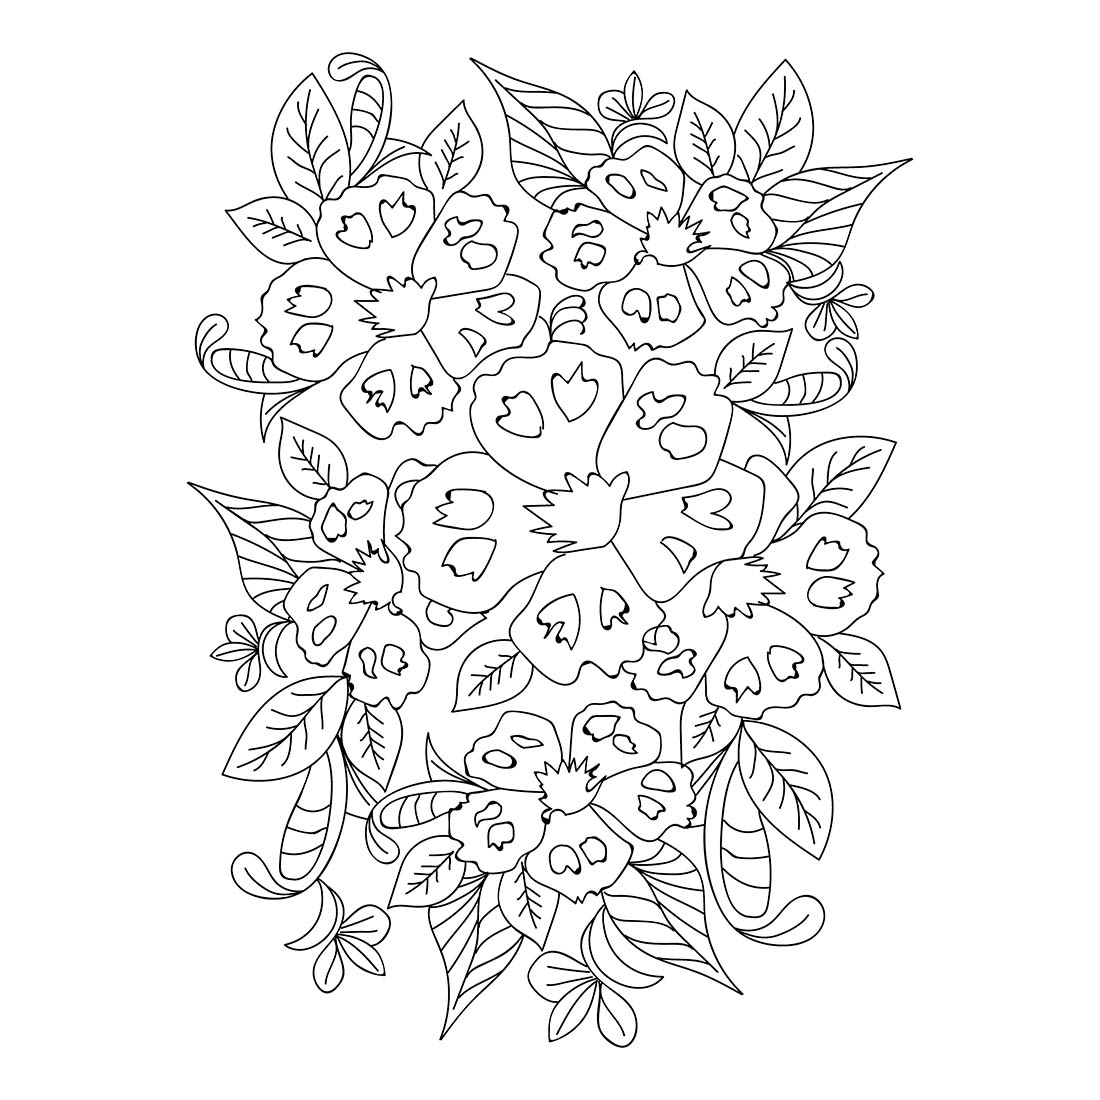 Common Daisy Doodle Drawing Flower PNG, Clipart, Area, Art